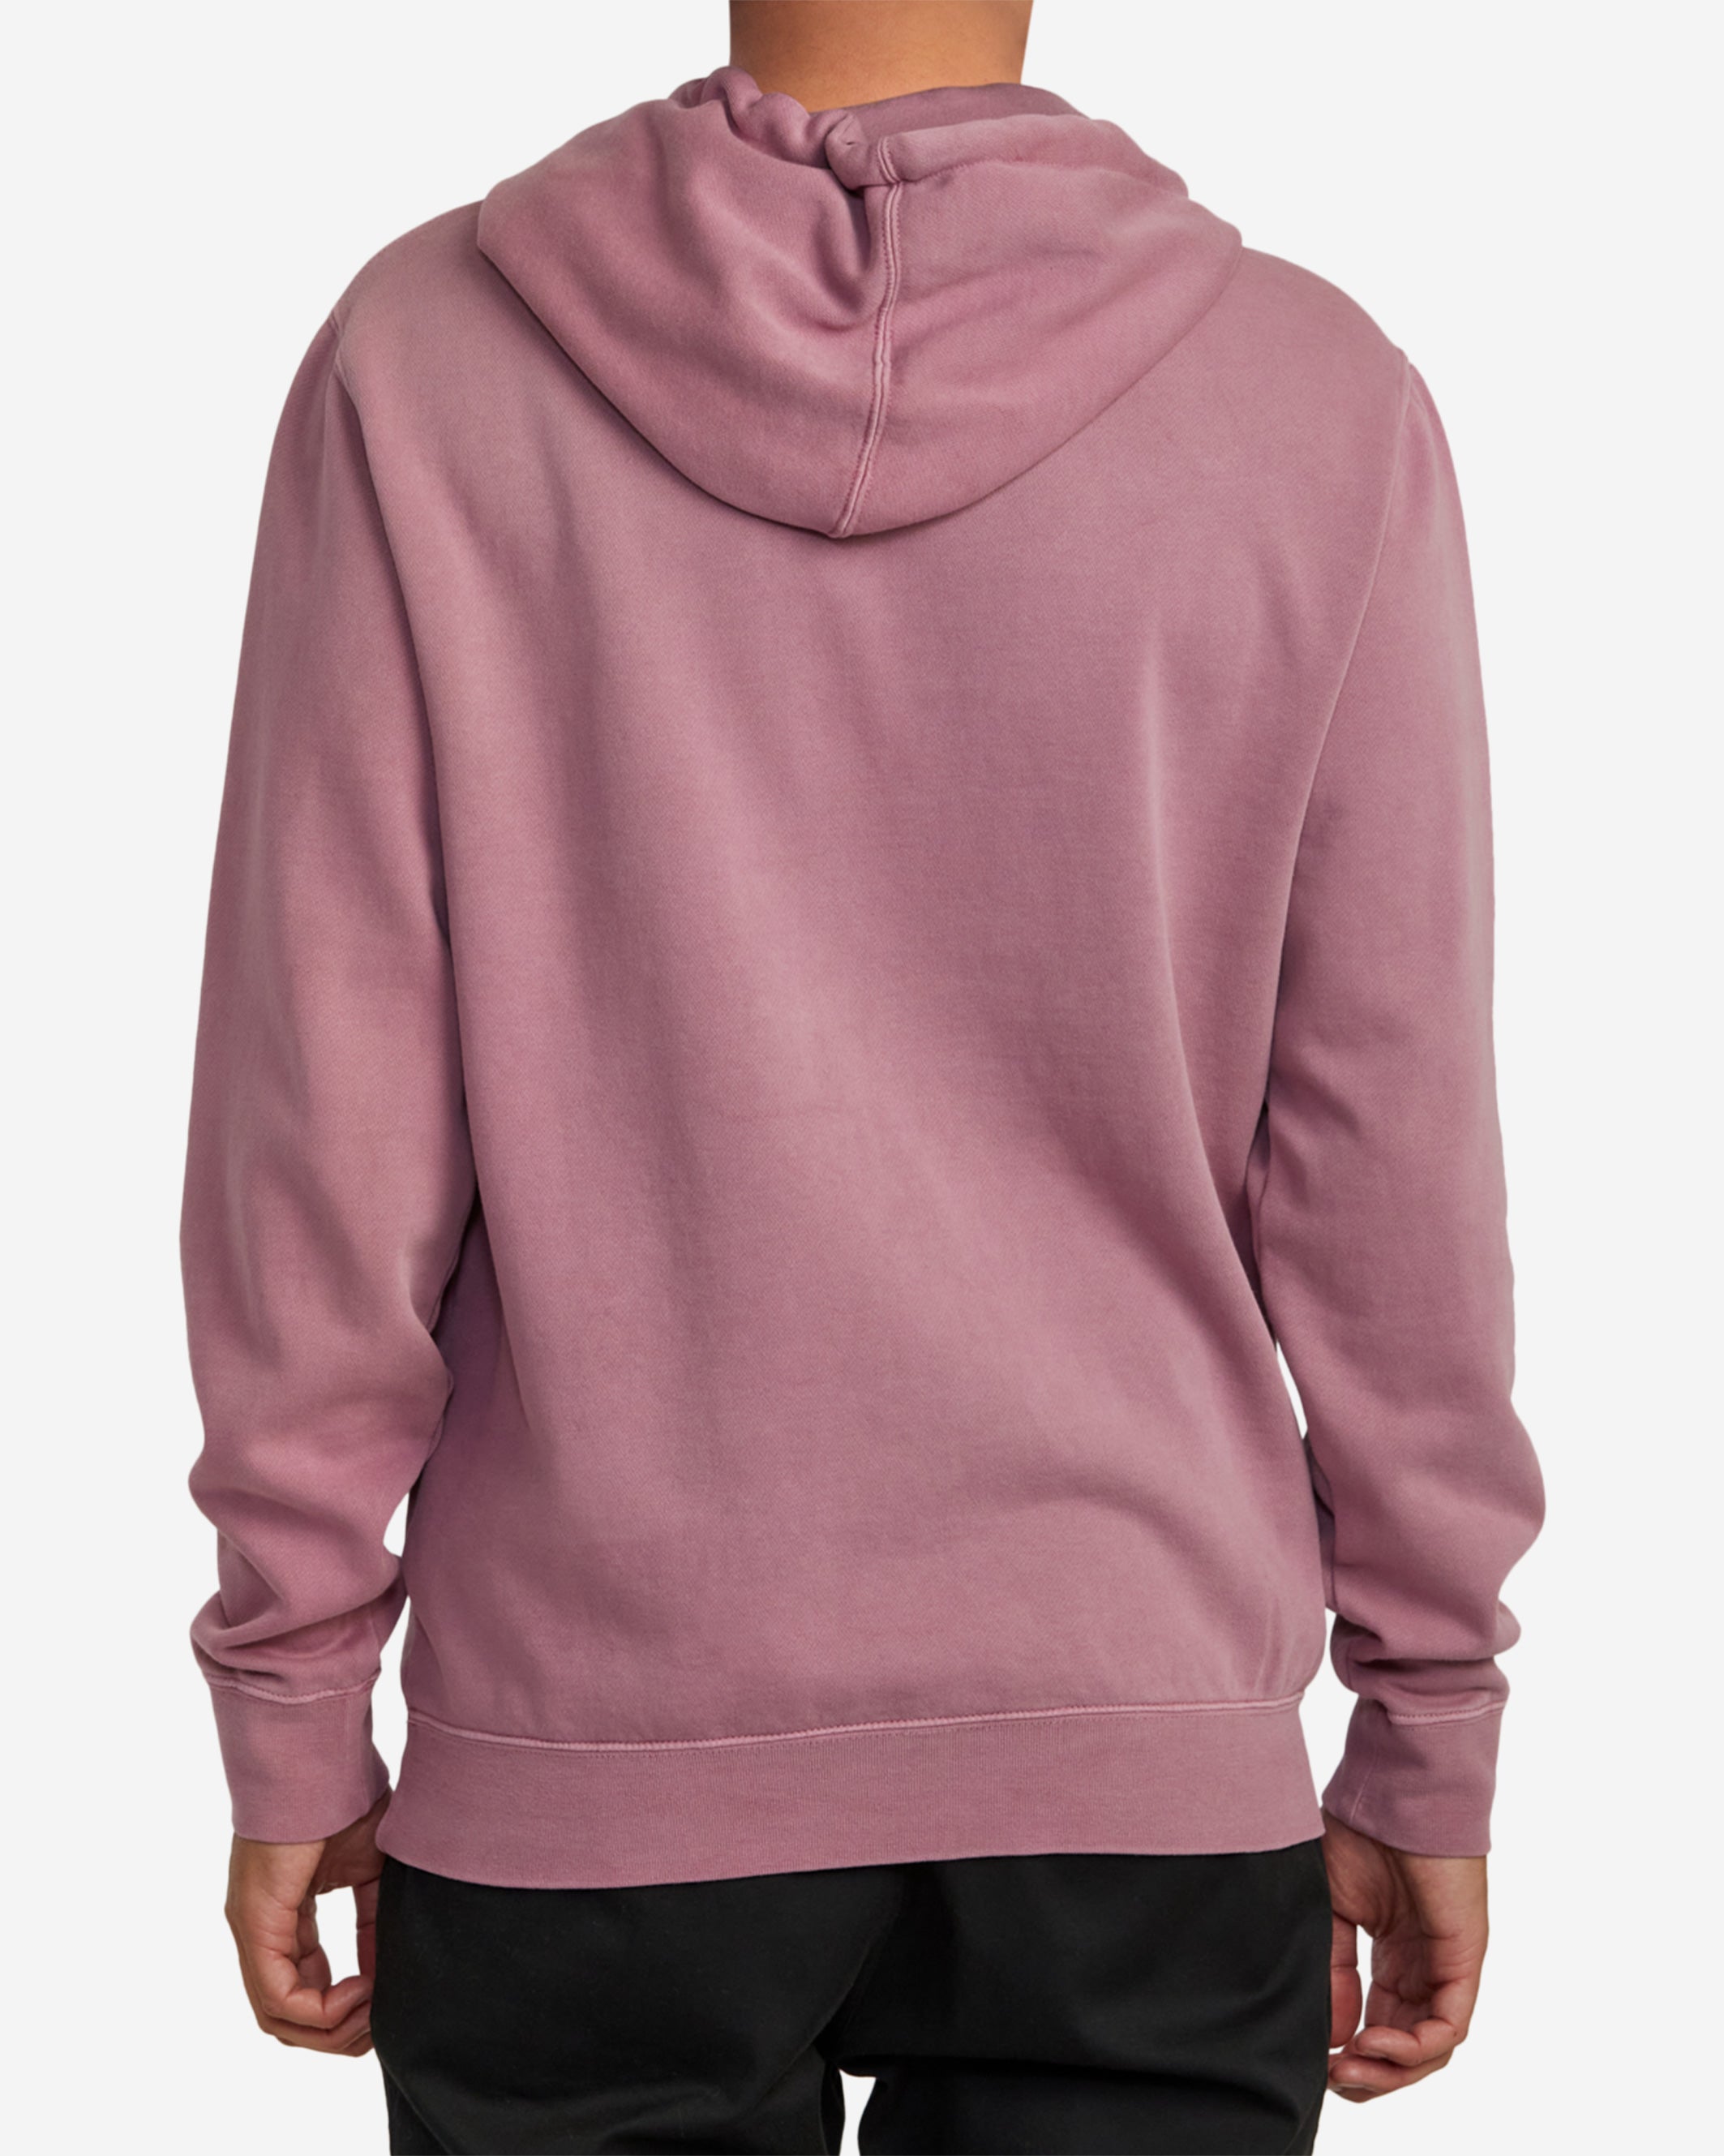 Layer up in style with this RVCA graphic hoodie. Made of soft blended cotton, the regular-fit sweatshirt features a screen-print graphic at the chest and a kangaroo pocket.